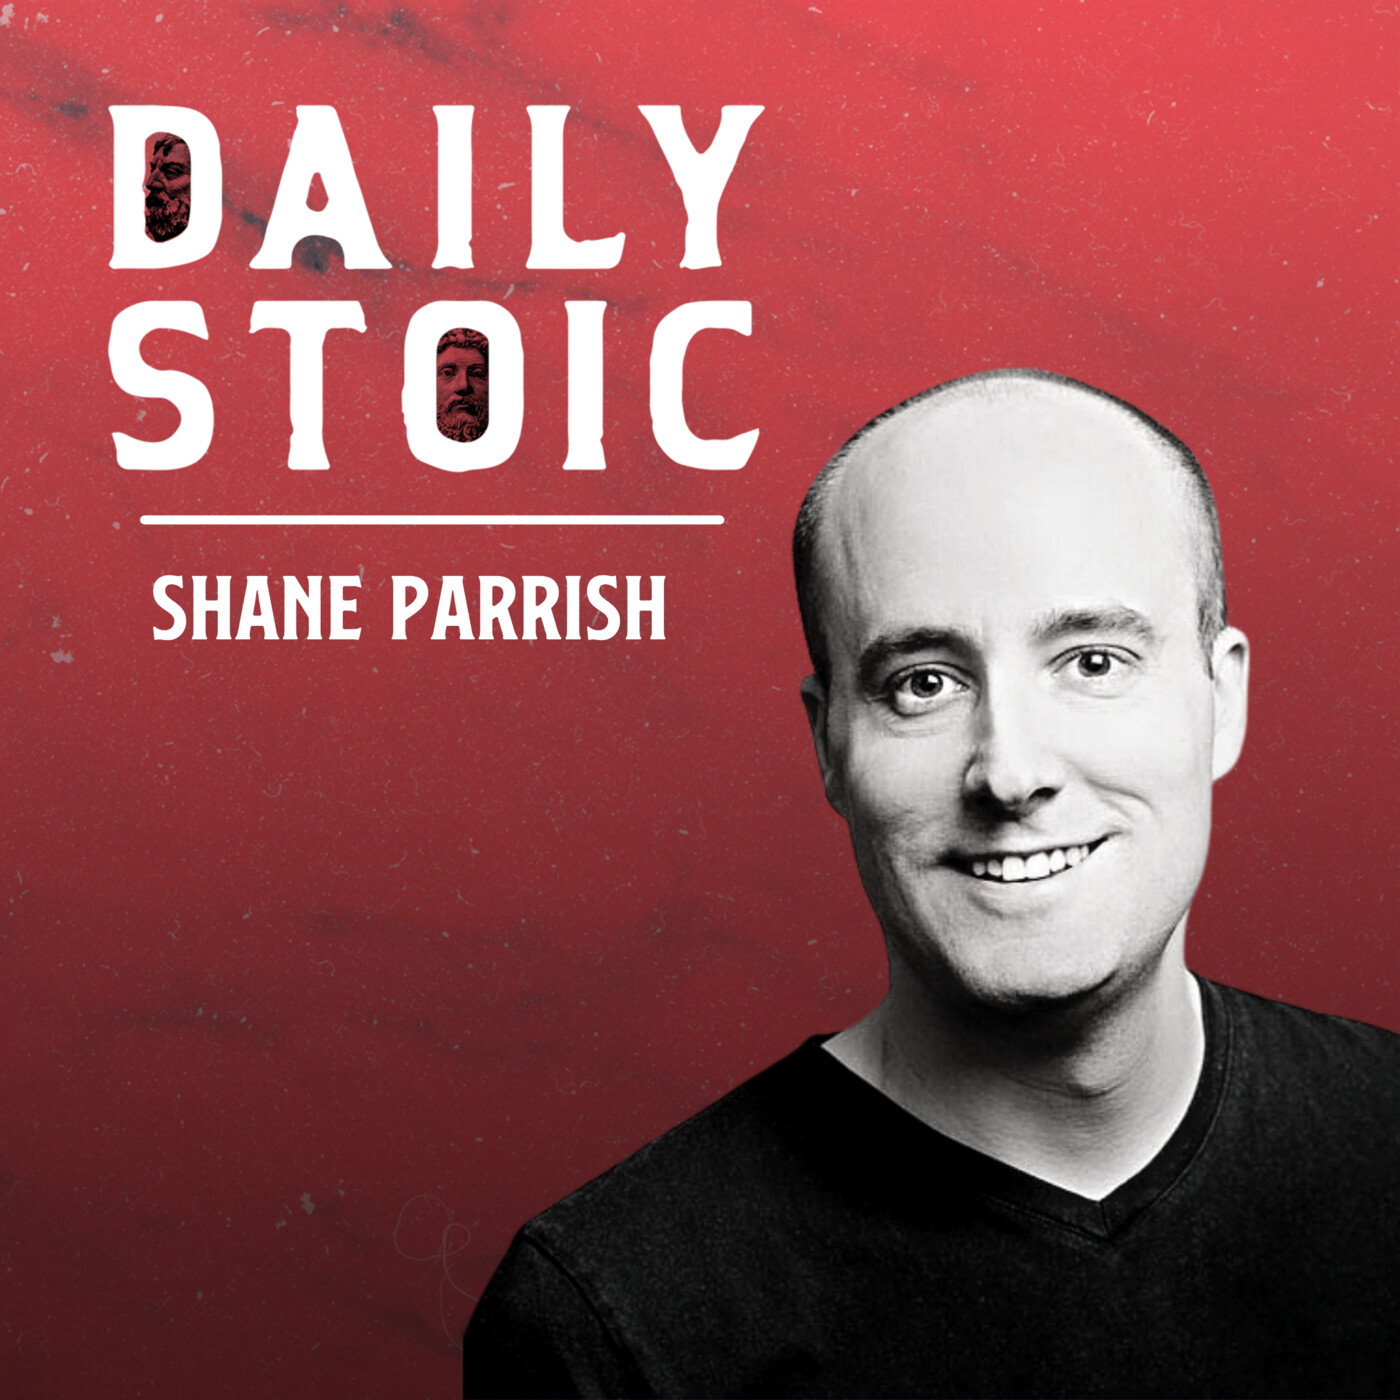 Shane Parrish on Finding Clarity and Making Better Decisions (Pt 1)